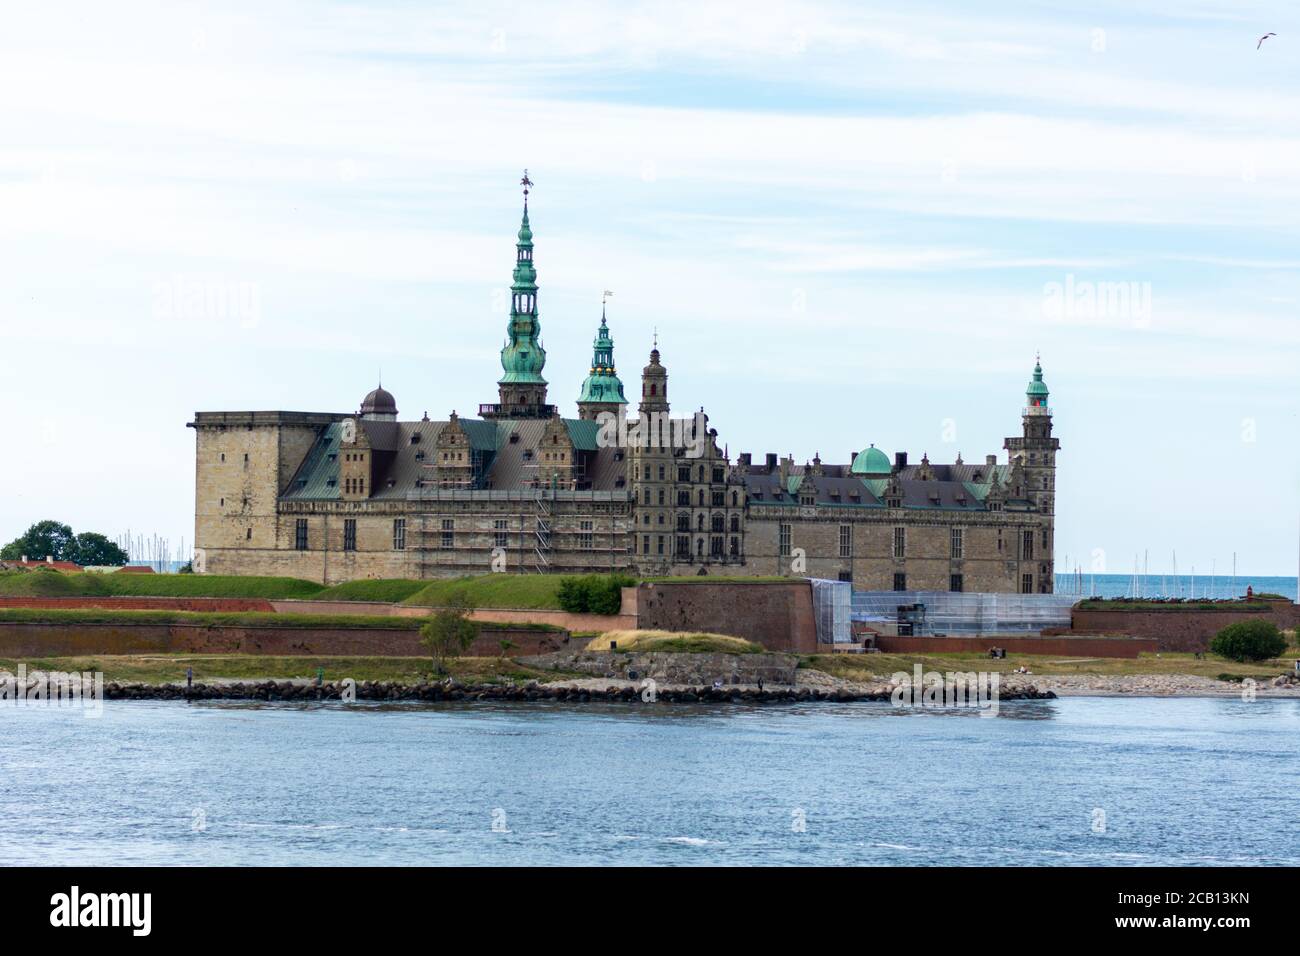 Elsinore, Denmark - August 2, 2020: The Kronborg castle known from William Shakespeare's play Hamlet. One of the most important Renaissance castles in Northern Europe. UNESCO's World Heritage Sites Stock Photo